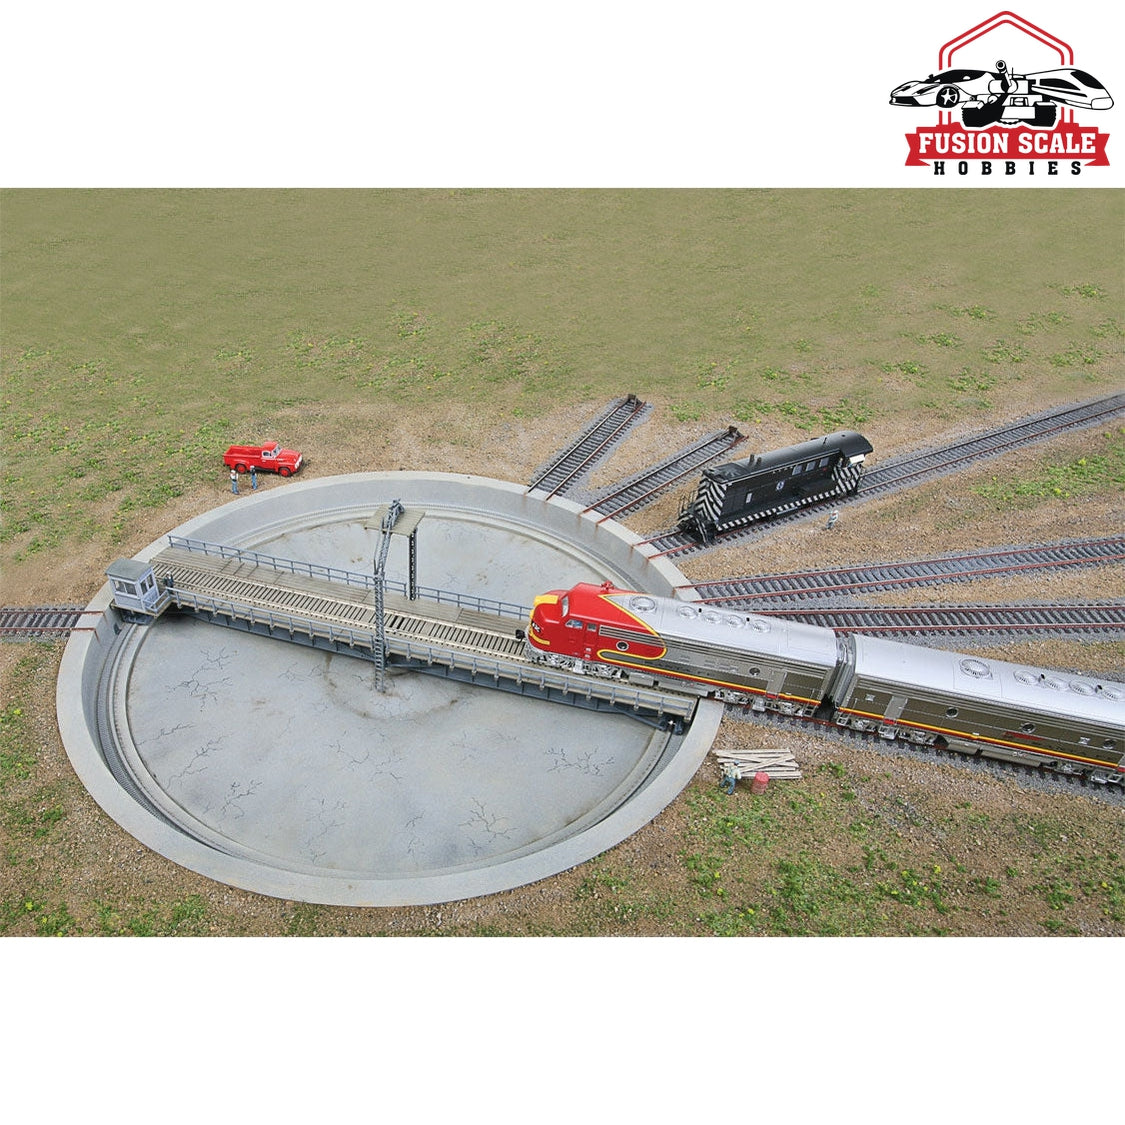 Walthers Cornerstone HO Scale Motorized 110' Turntable Assembled 167/16" 41.7cm Overall Diameter